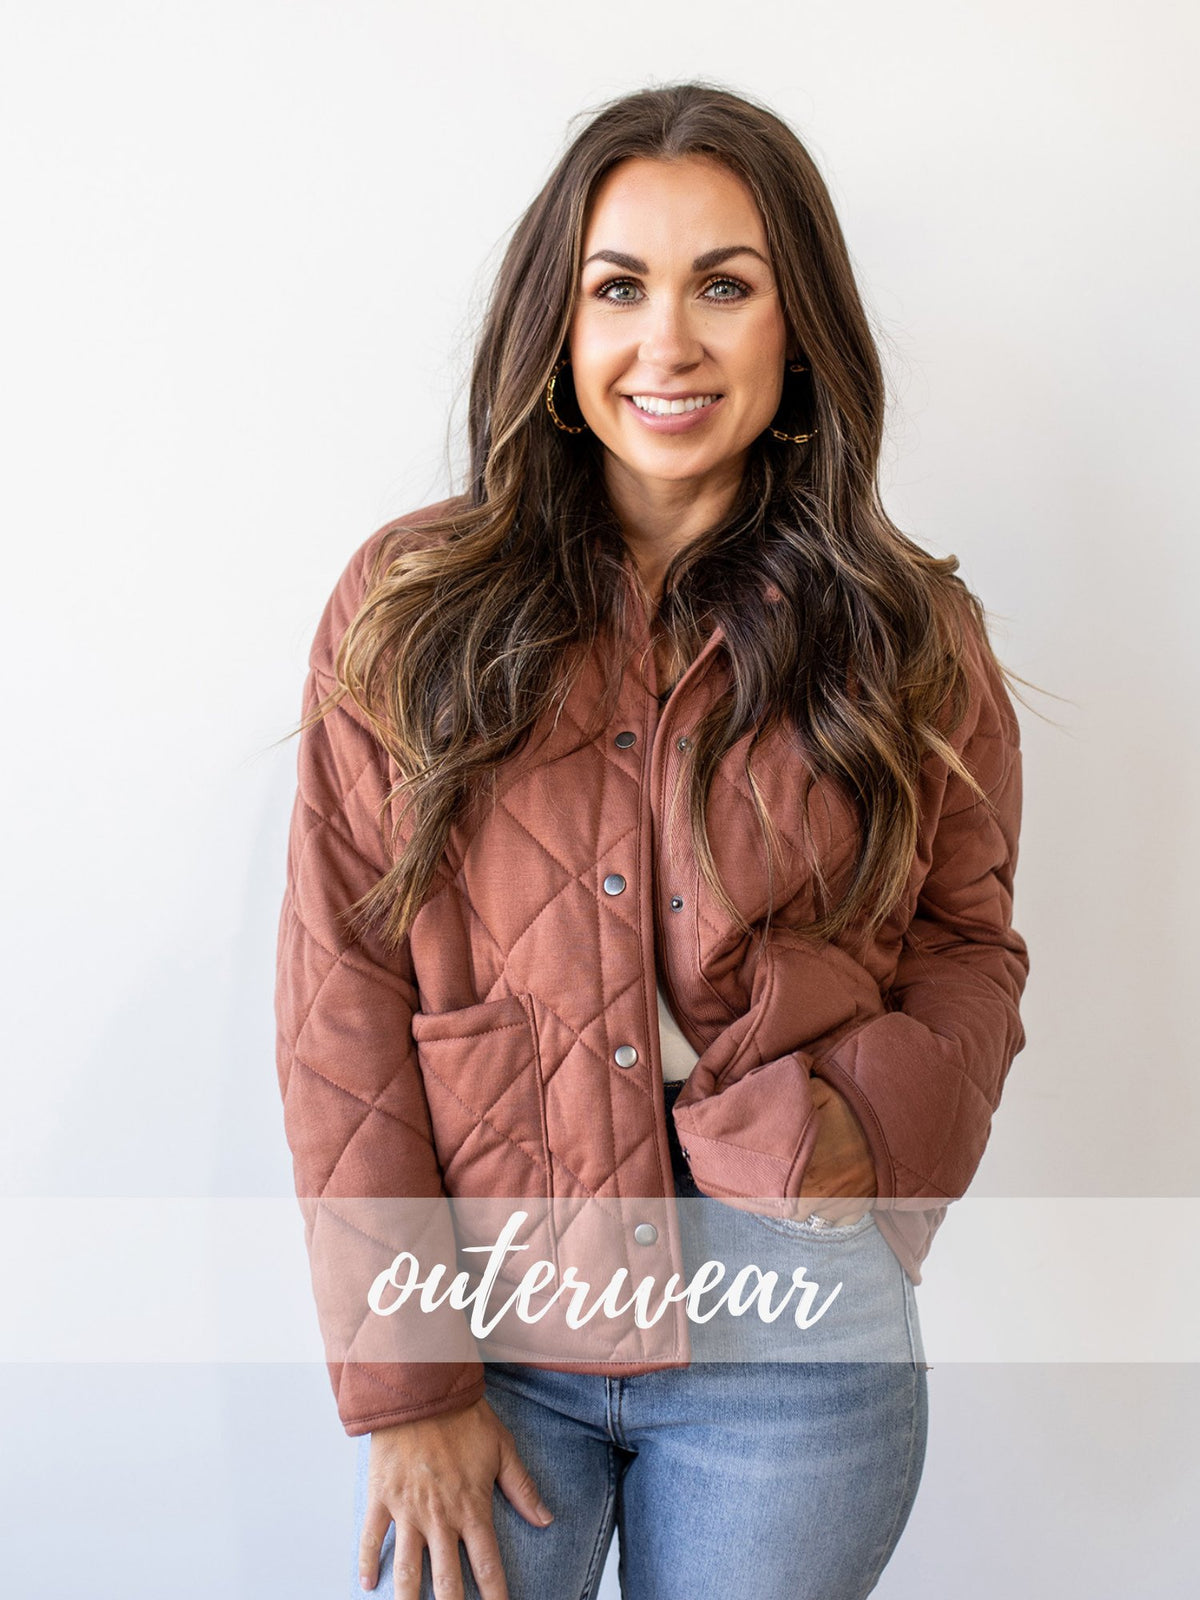 VerClare Boutique | Shop Our Women's Online Fashion Boutique | Our Newest Women's Outerwear | Located in Bloomington, Illinois